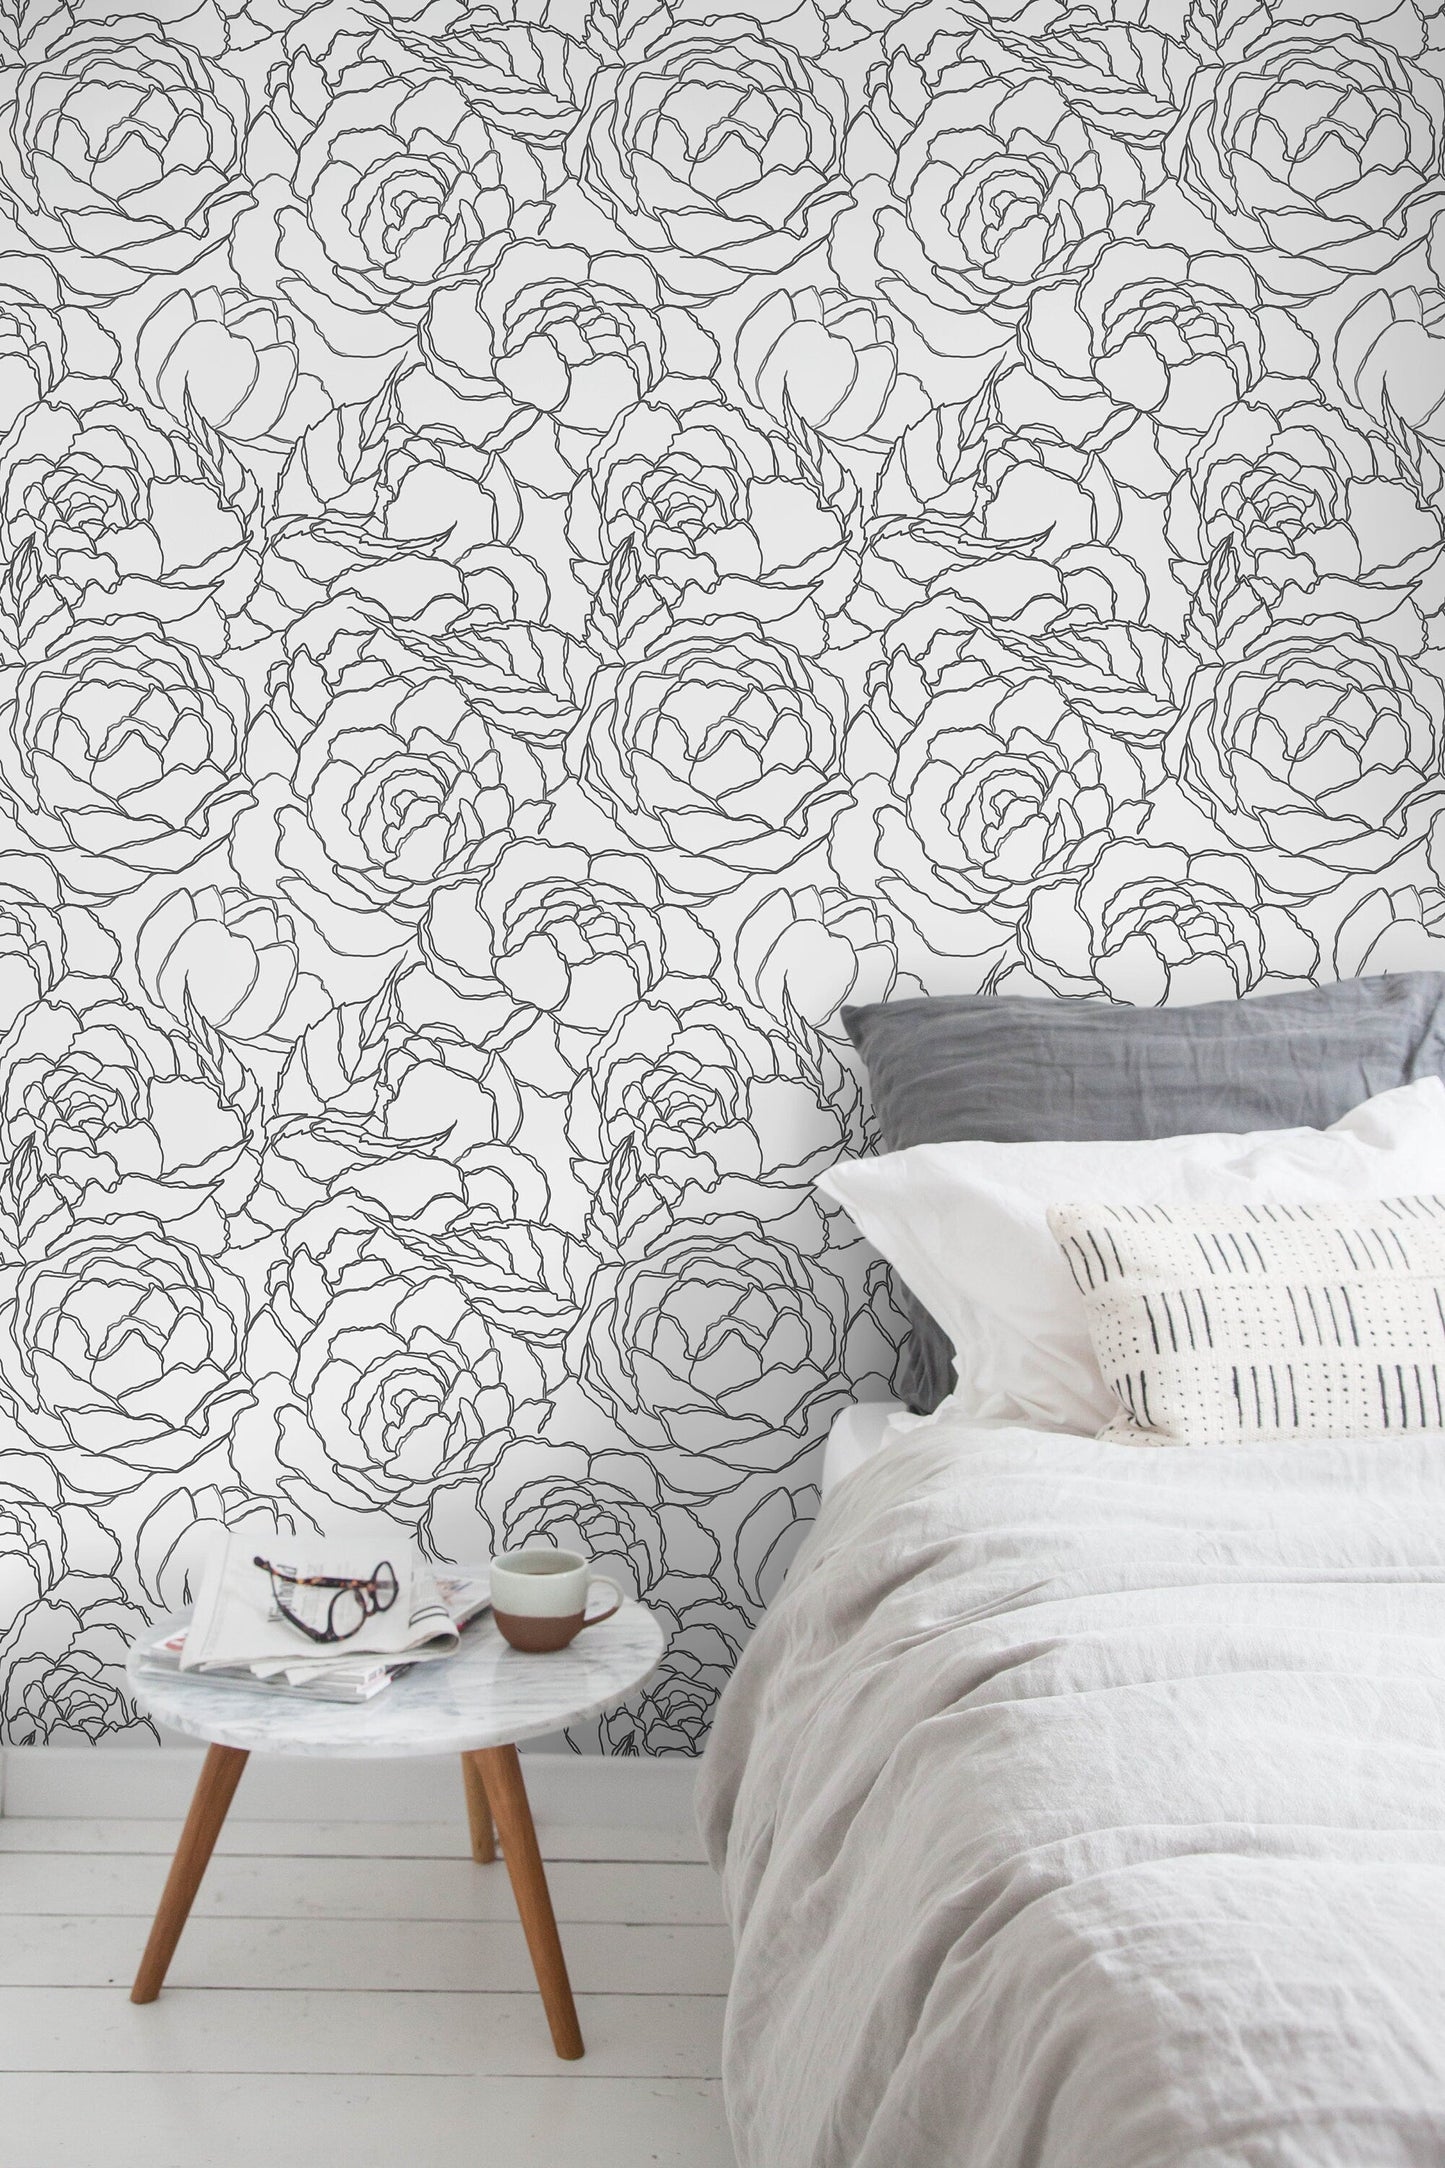 Gray Large Floral Wallpaper / Peel and Stick Wallpaper Removable Wallpaper Home Decor Wall Art Wall Decor Room Decor - C872